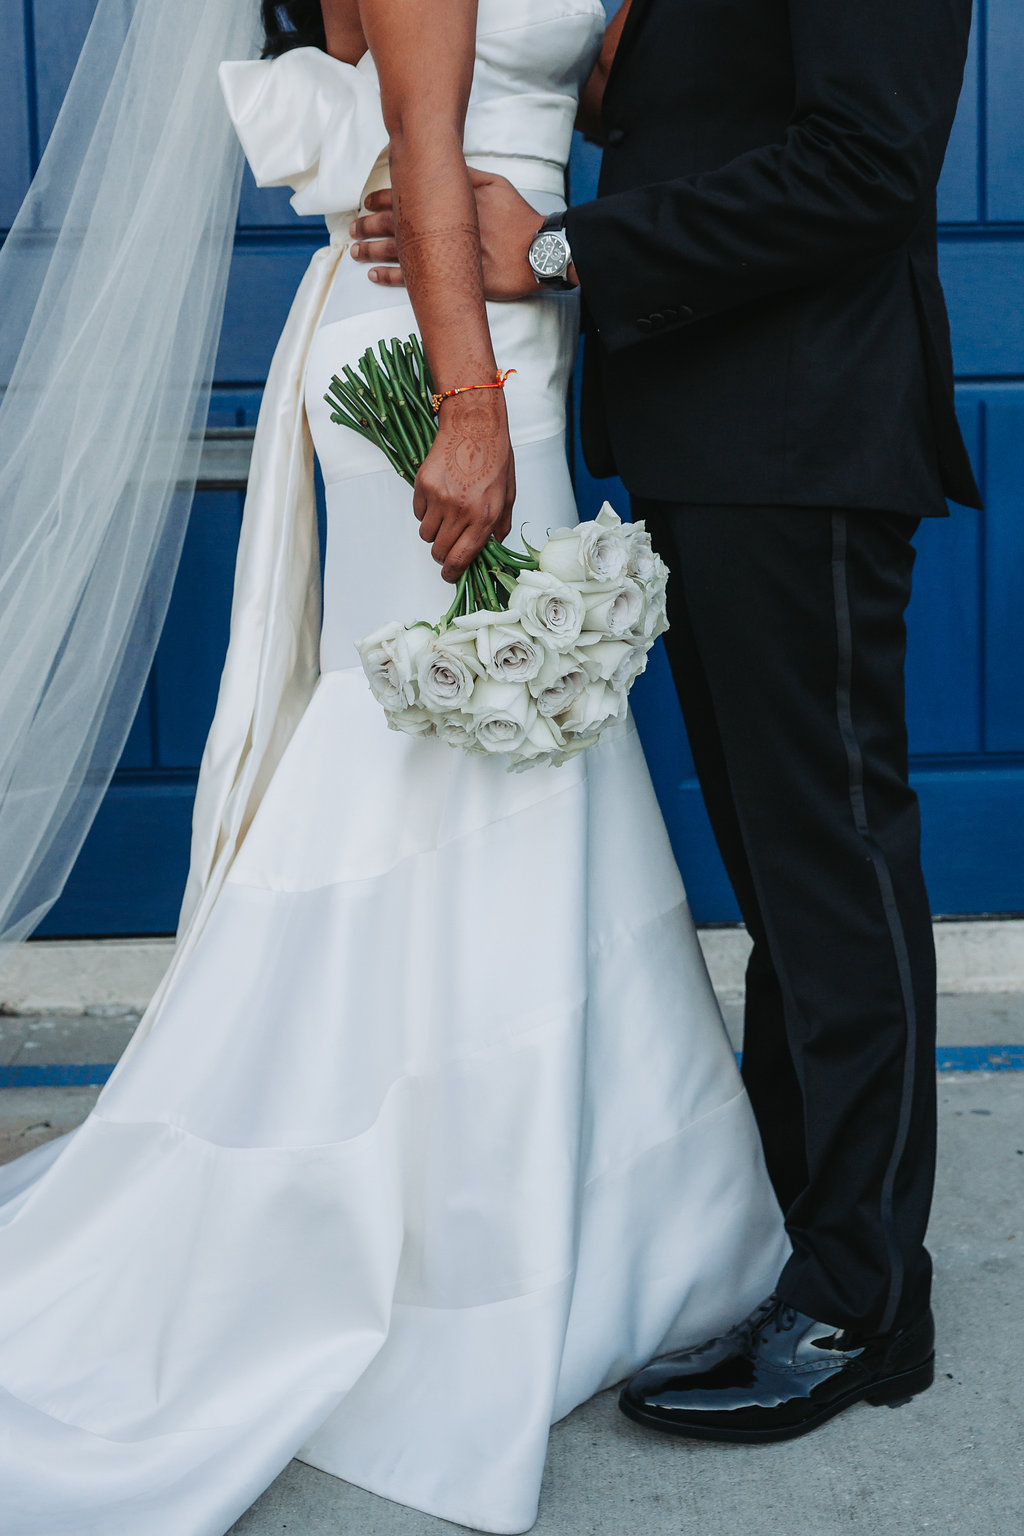 Modern Indian Wedding Bride and Groom Portrait, Bride in Strapless Wedding Dress, Groom in Black Tuxedo with White Rose Boutonniere and White Rose Bouquet | Tampa Wedding Photographer Grind and Press Photography